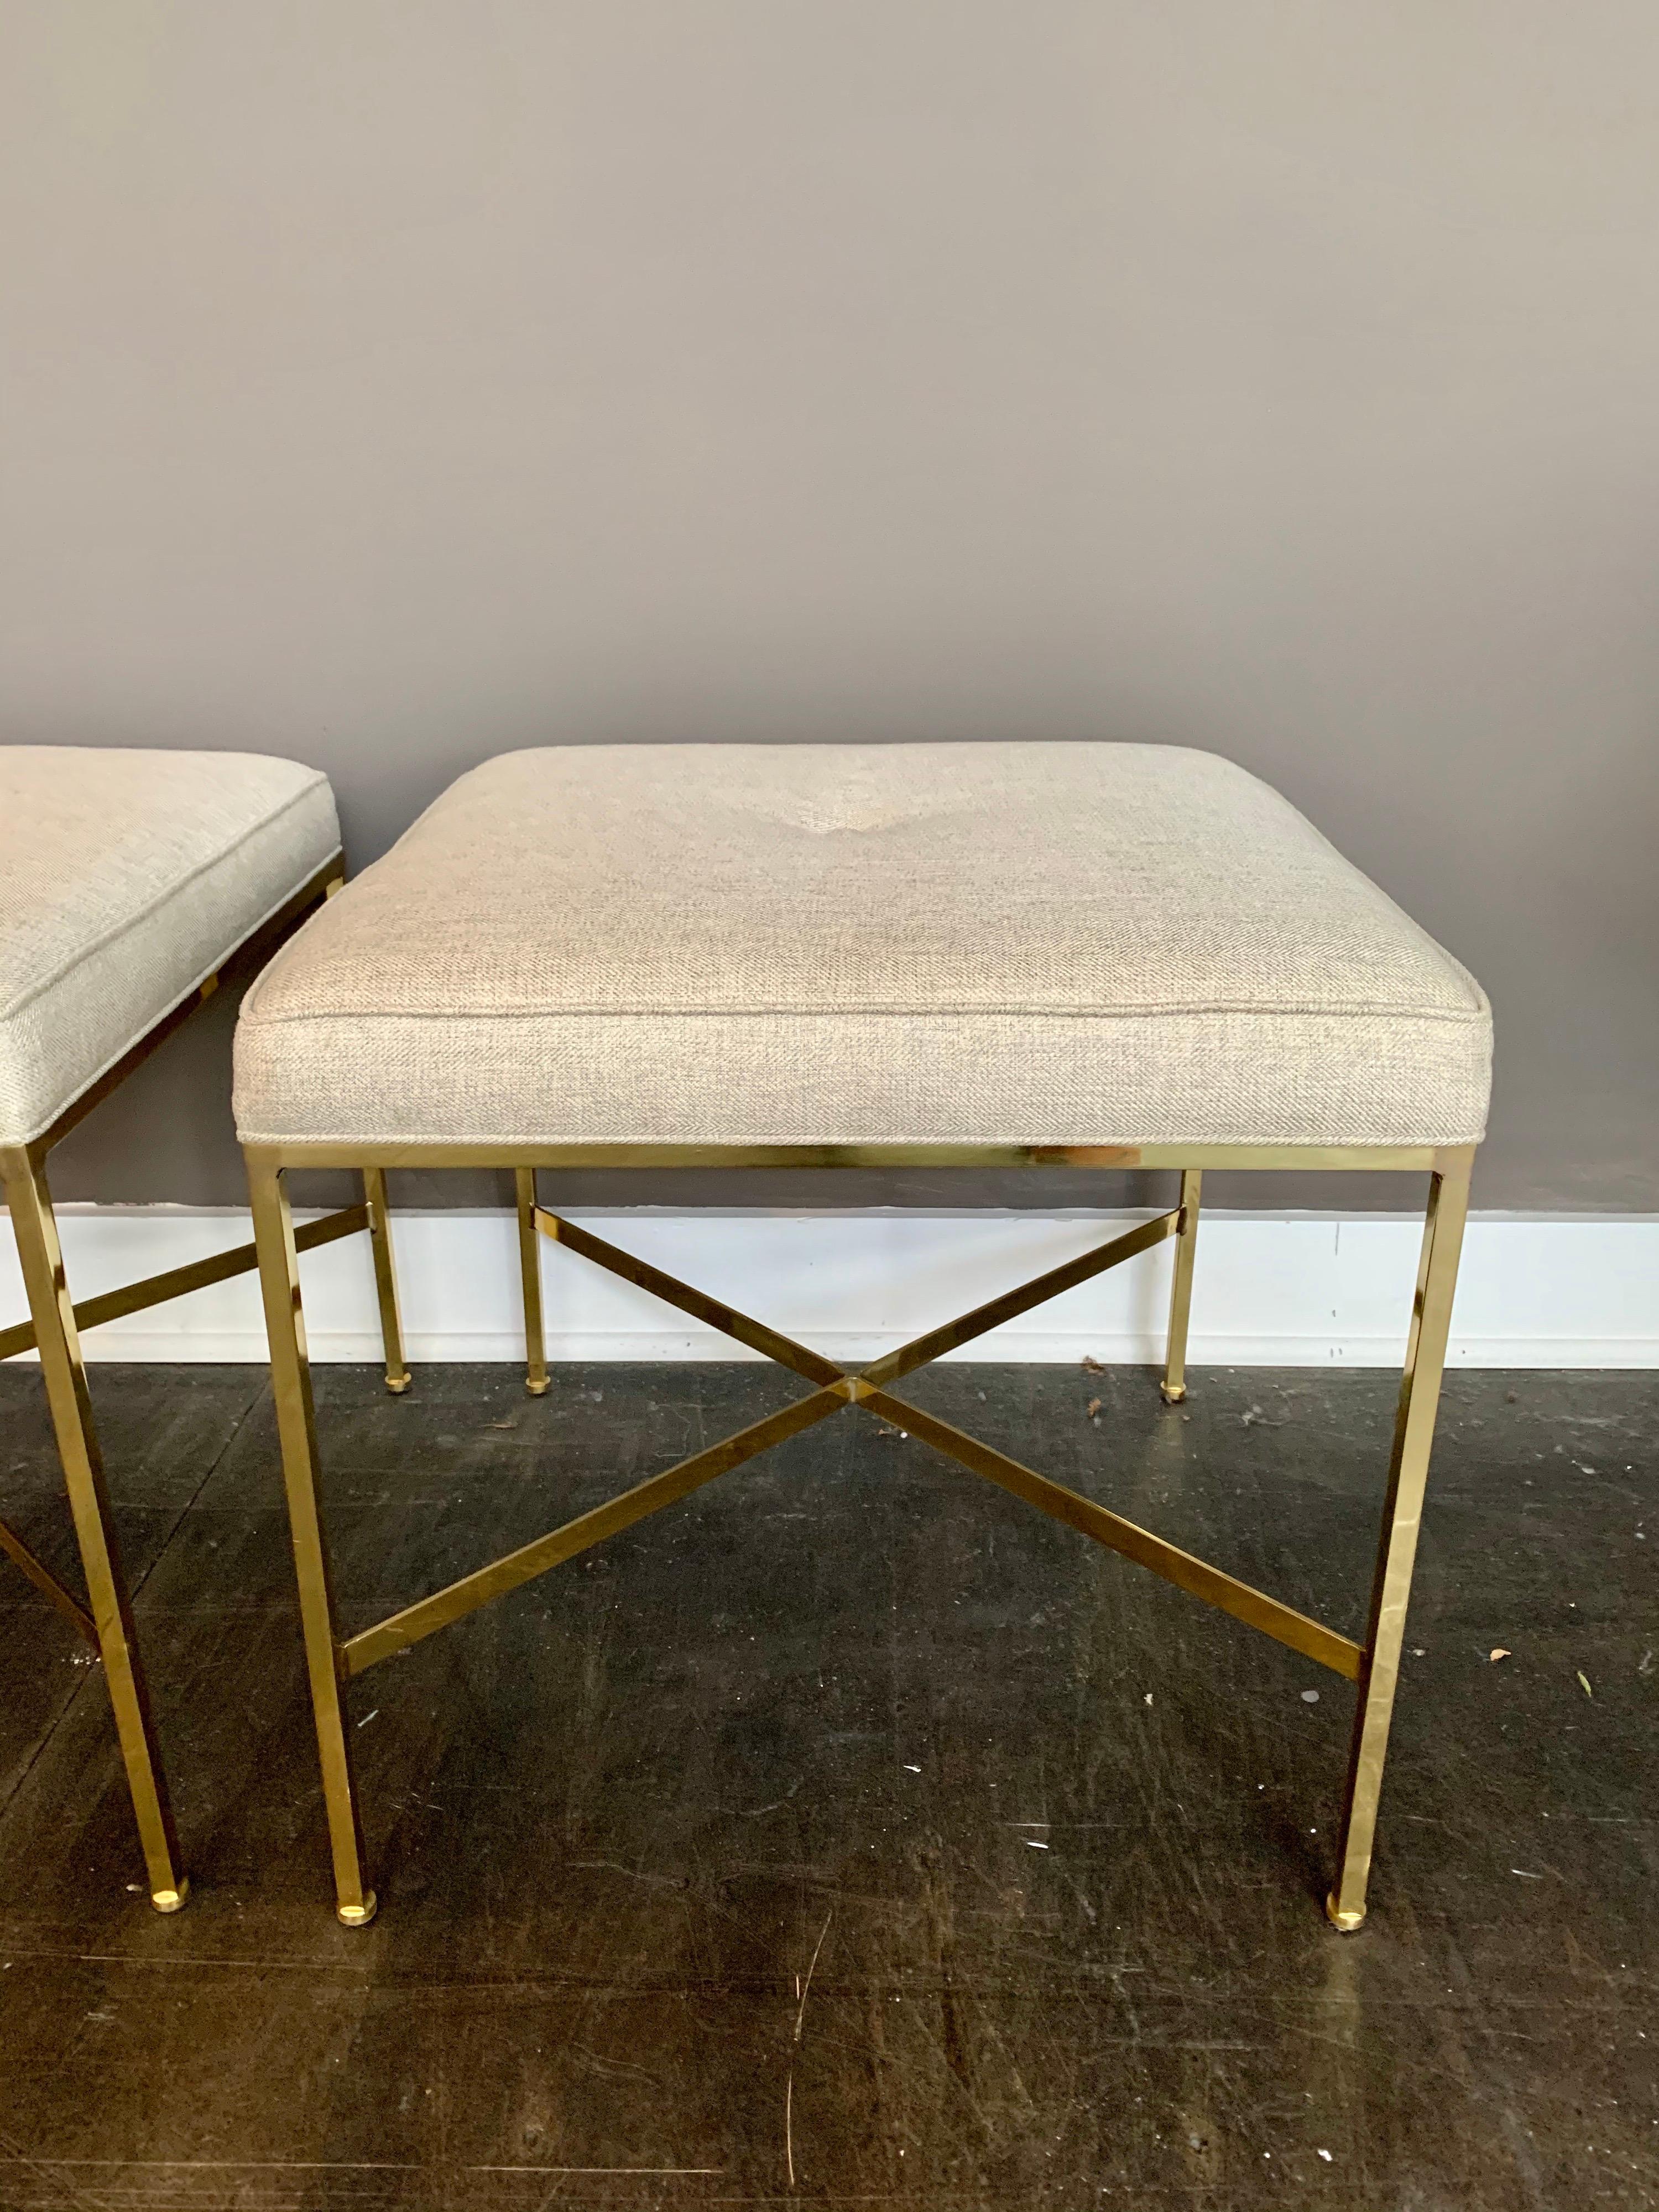 These X-base design brass stools by Paul McCobb for Calvin Furniture are truly classic and perfect for any space.
Newly upholstered seats by Gustavo Olivieri Antiques, original patina is very nice.